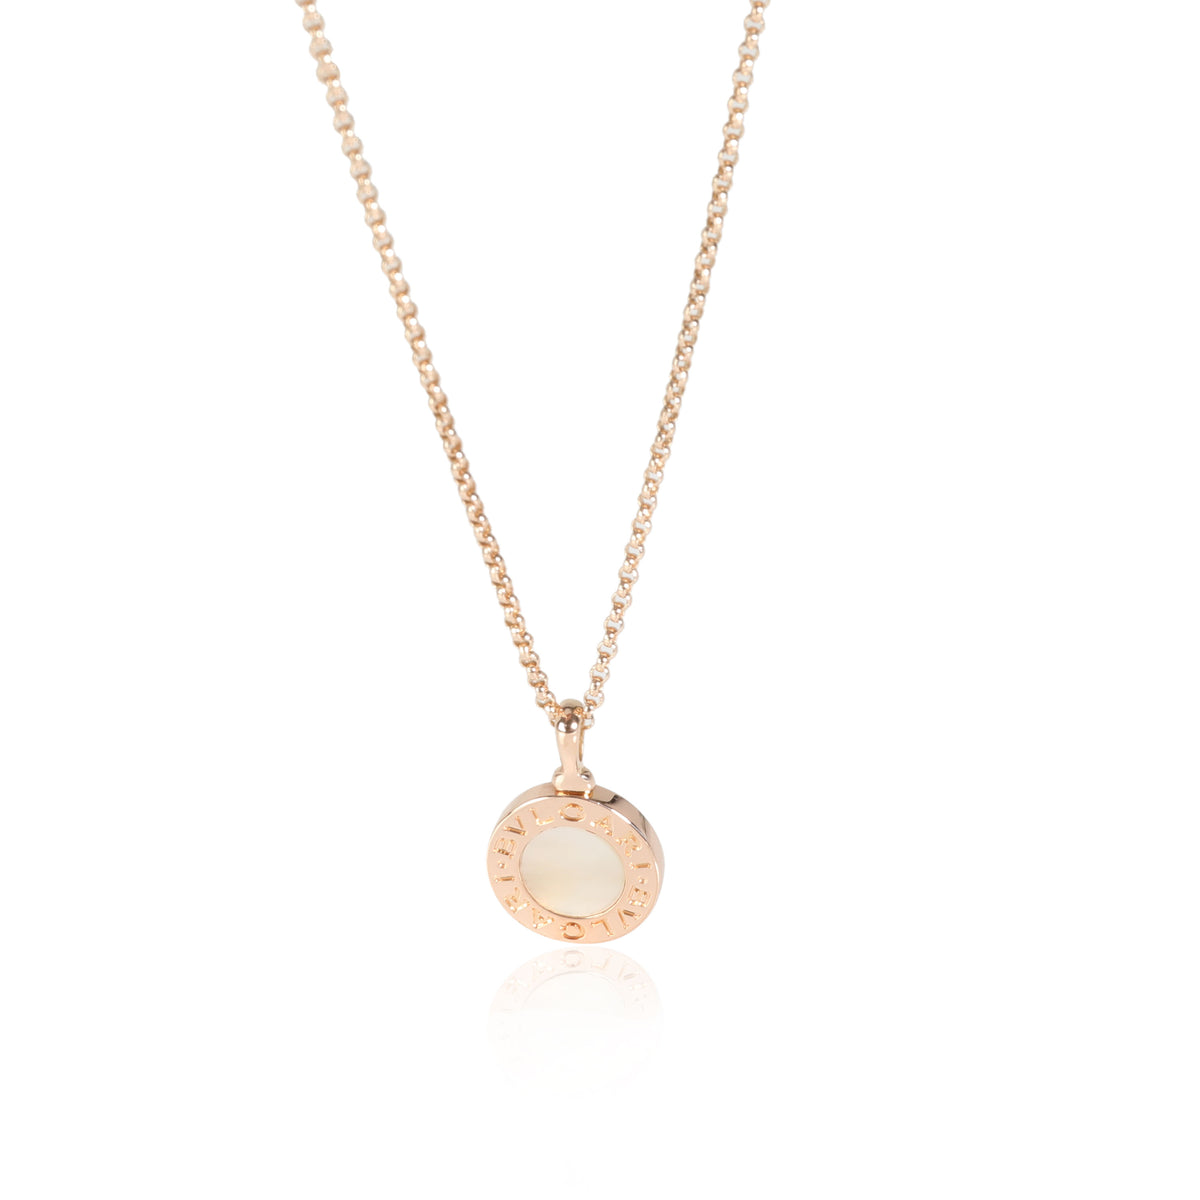 Bvlgari Diva's Dream Mother-of-Pearl Necklace with Diamond and Rubies -  ShopStyle